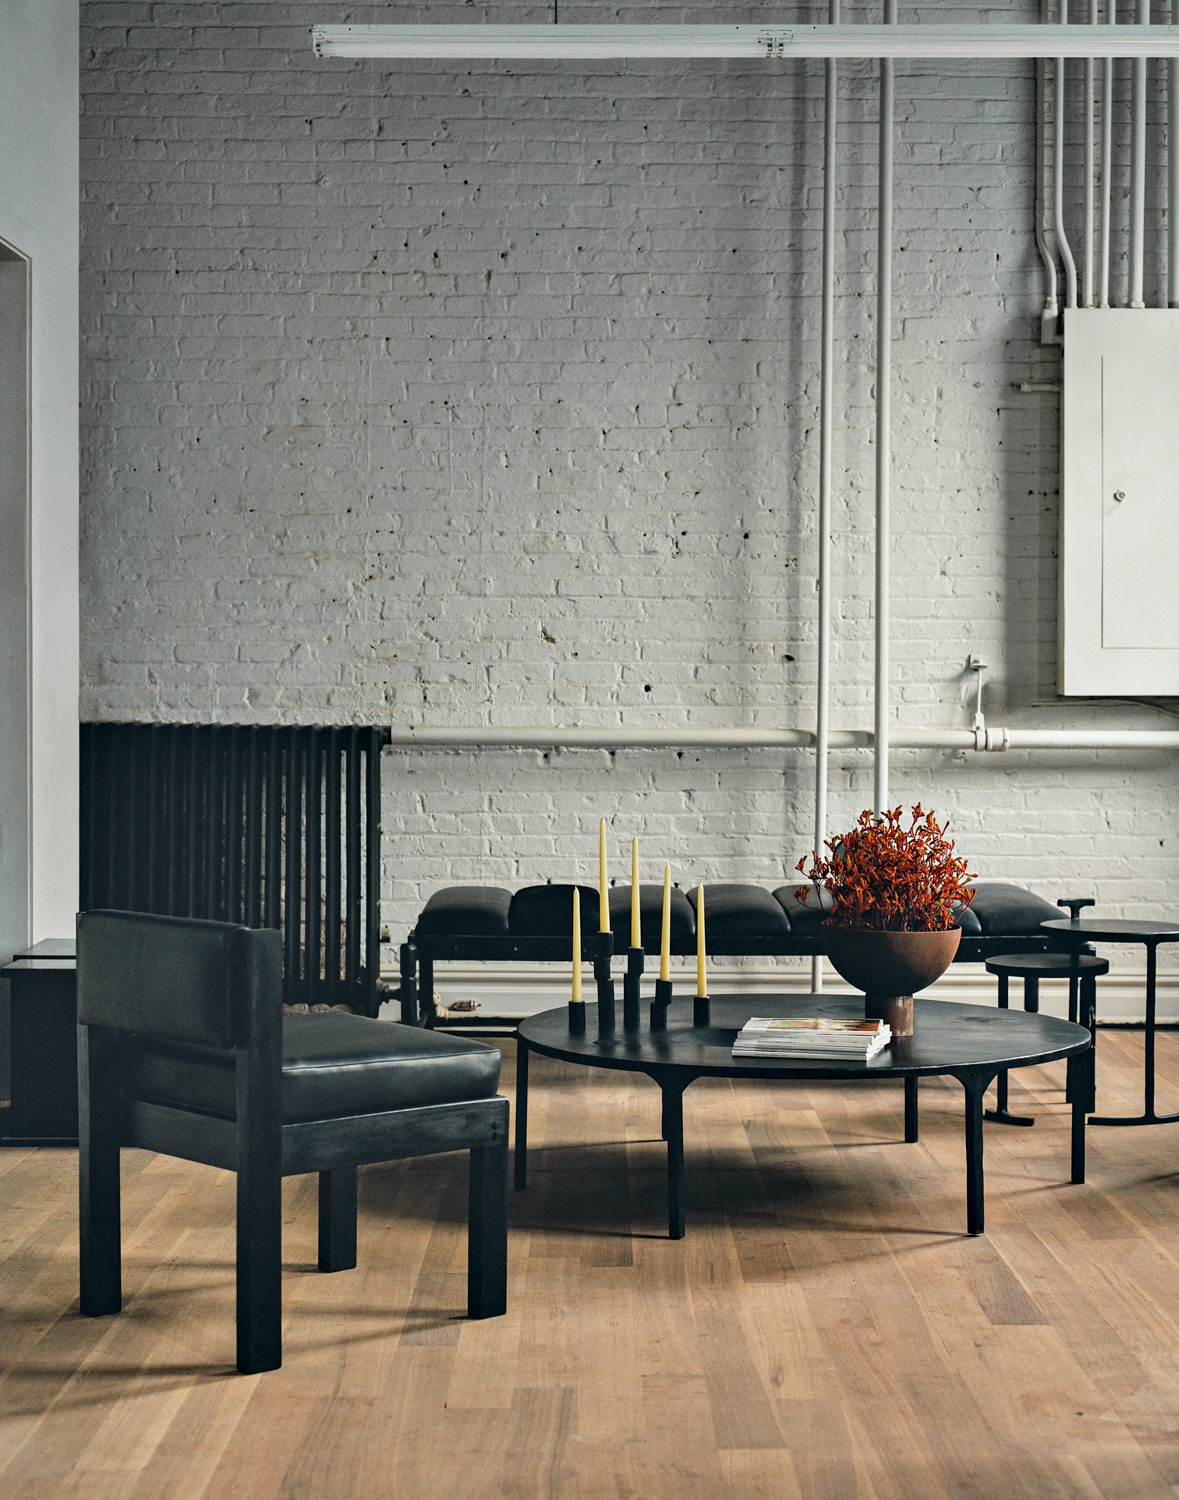 all-black coffee table, armchair and sofa against a brick wall painted white at the J.M Szymanski workshop and showroom